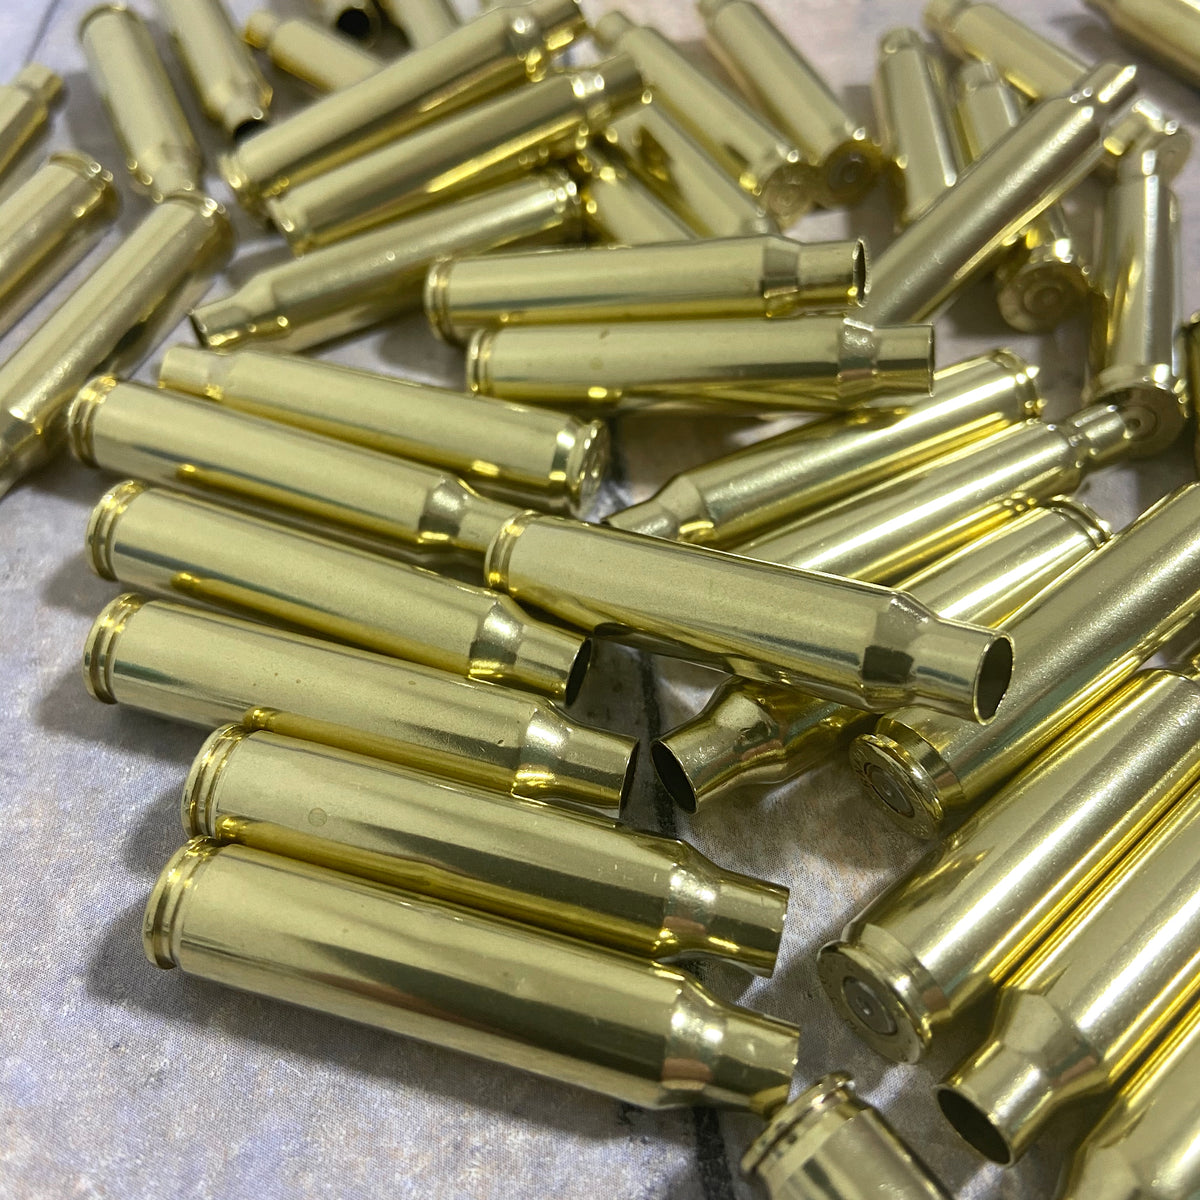 9mm brass ammo for sale